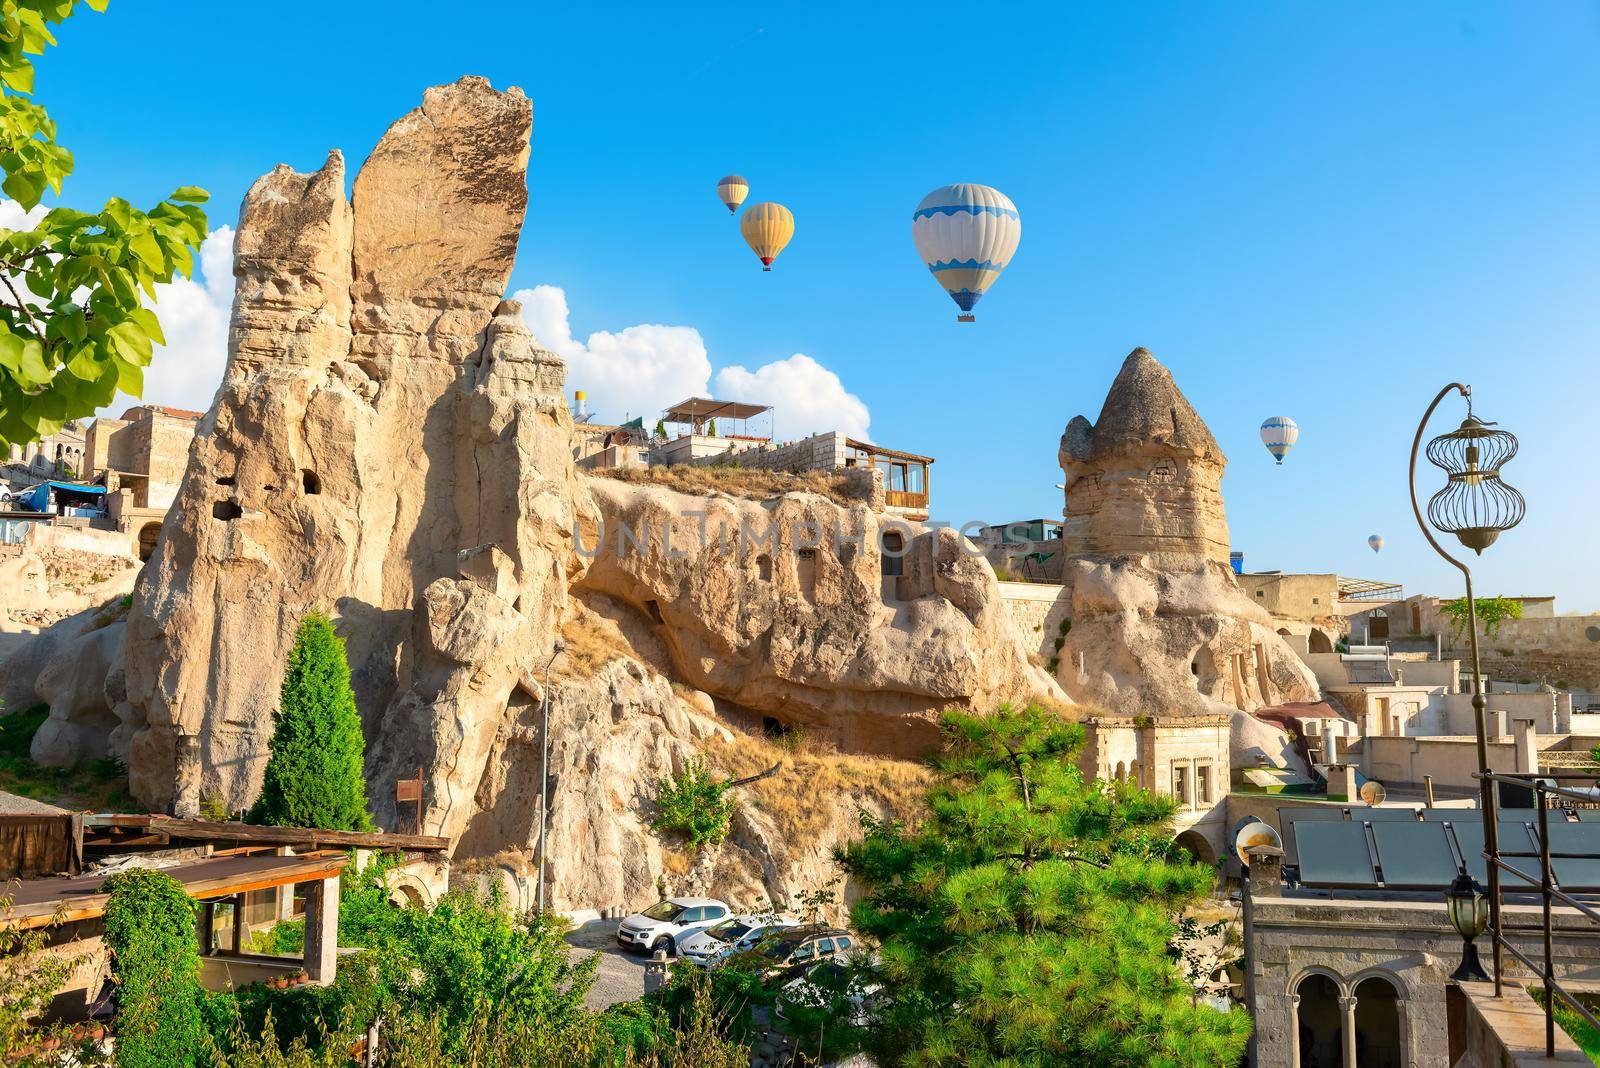 Air balloons at day in Goreme by Givaga